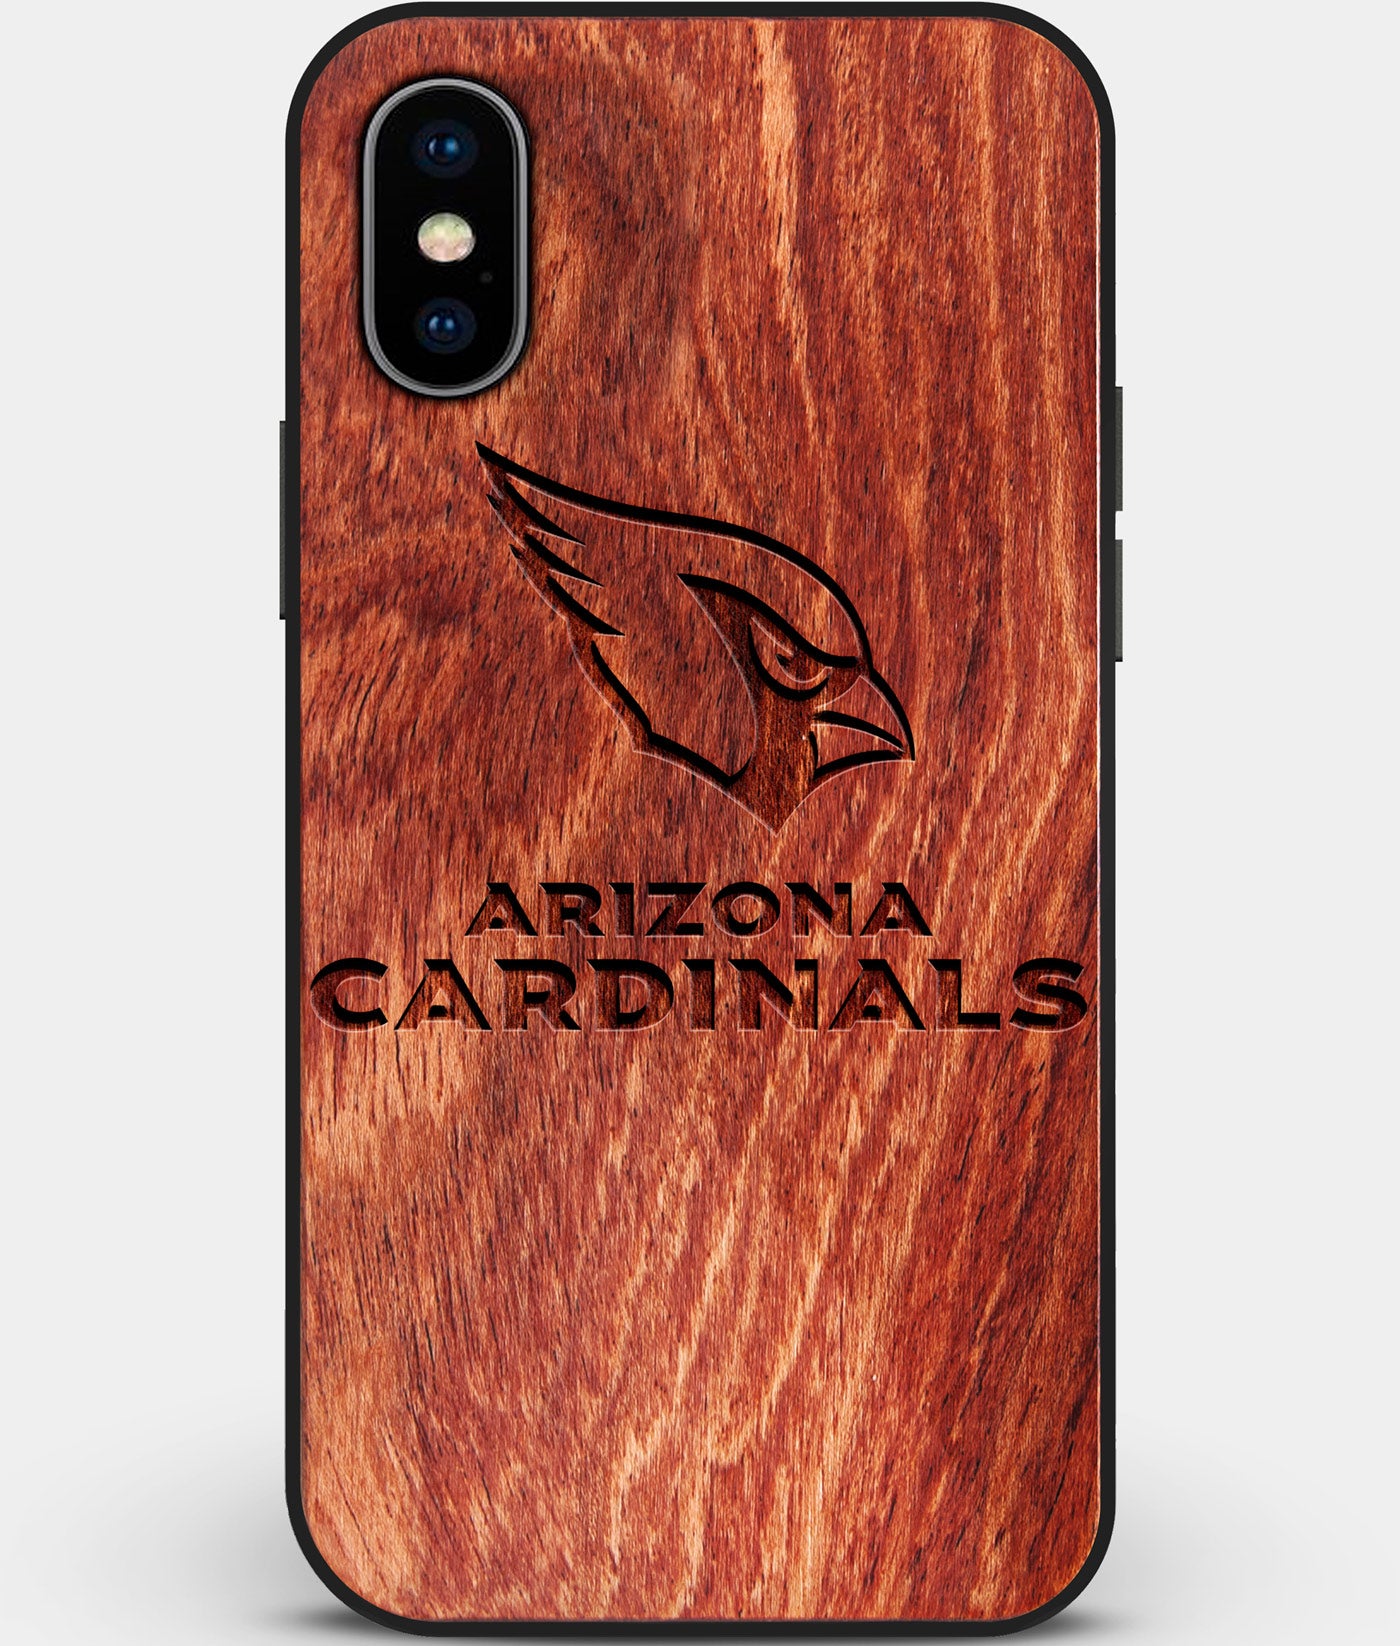 Custom Carved Wood Arizona Cardinals iPhone X/XS Case | Personalized Mahogany Wood Arizona Cardinals Cover, Birthday Gift, Gifts For Him, Monogrammed Gift For Fan | by Engraved In Nature